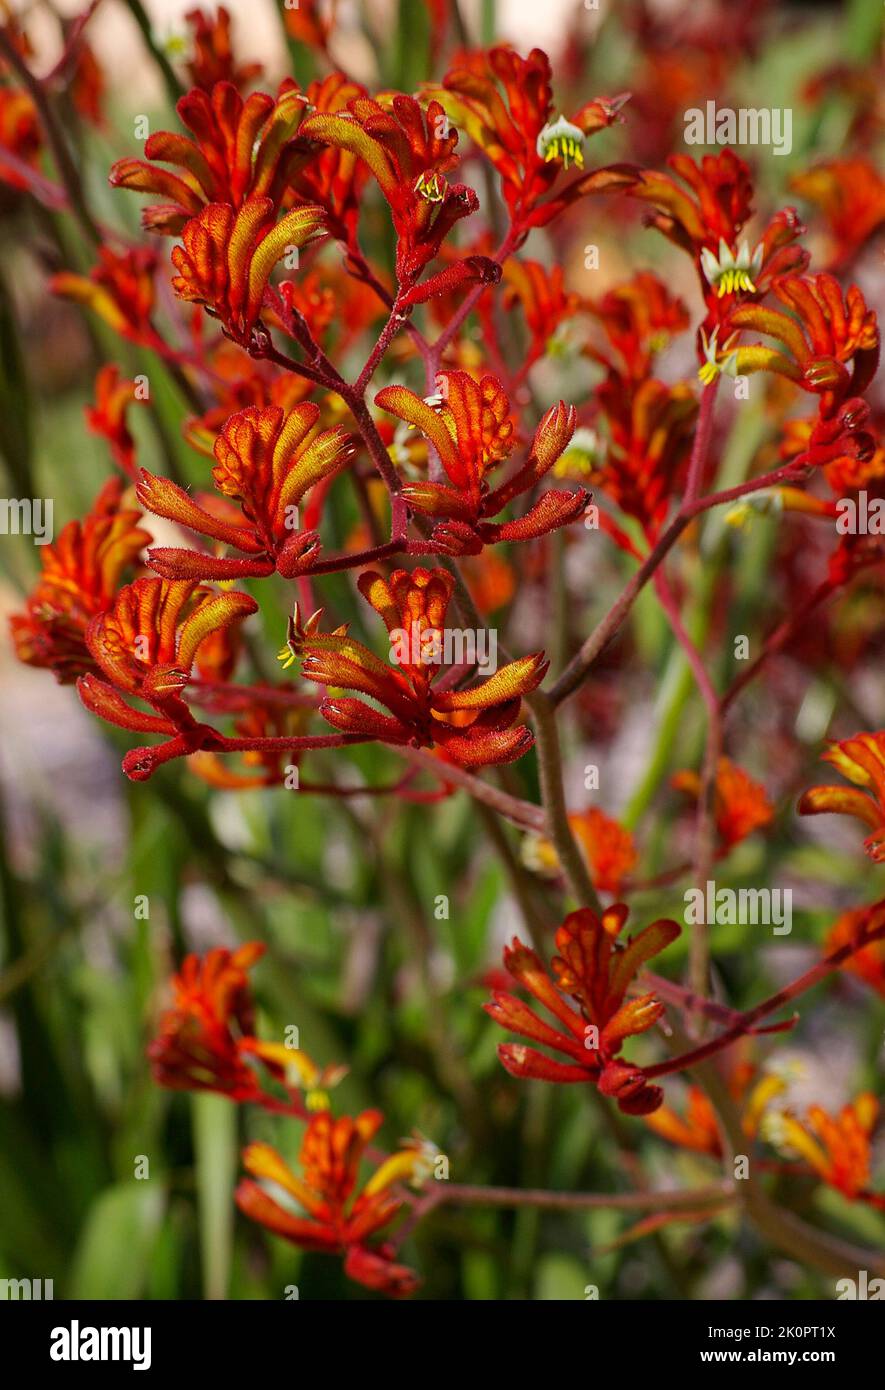 Clump of Australian Kangaroo Paw flowers (Anigozanthos) in summer in a garden in Queensland. Red and orange claw-like flowers with lots of nectar. Stock Photo